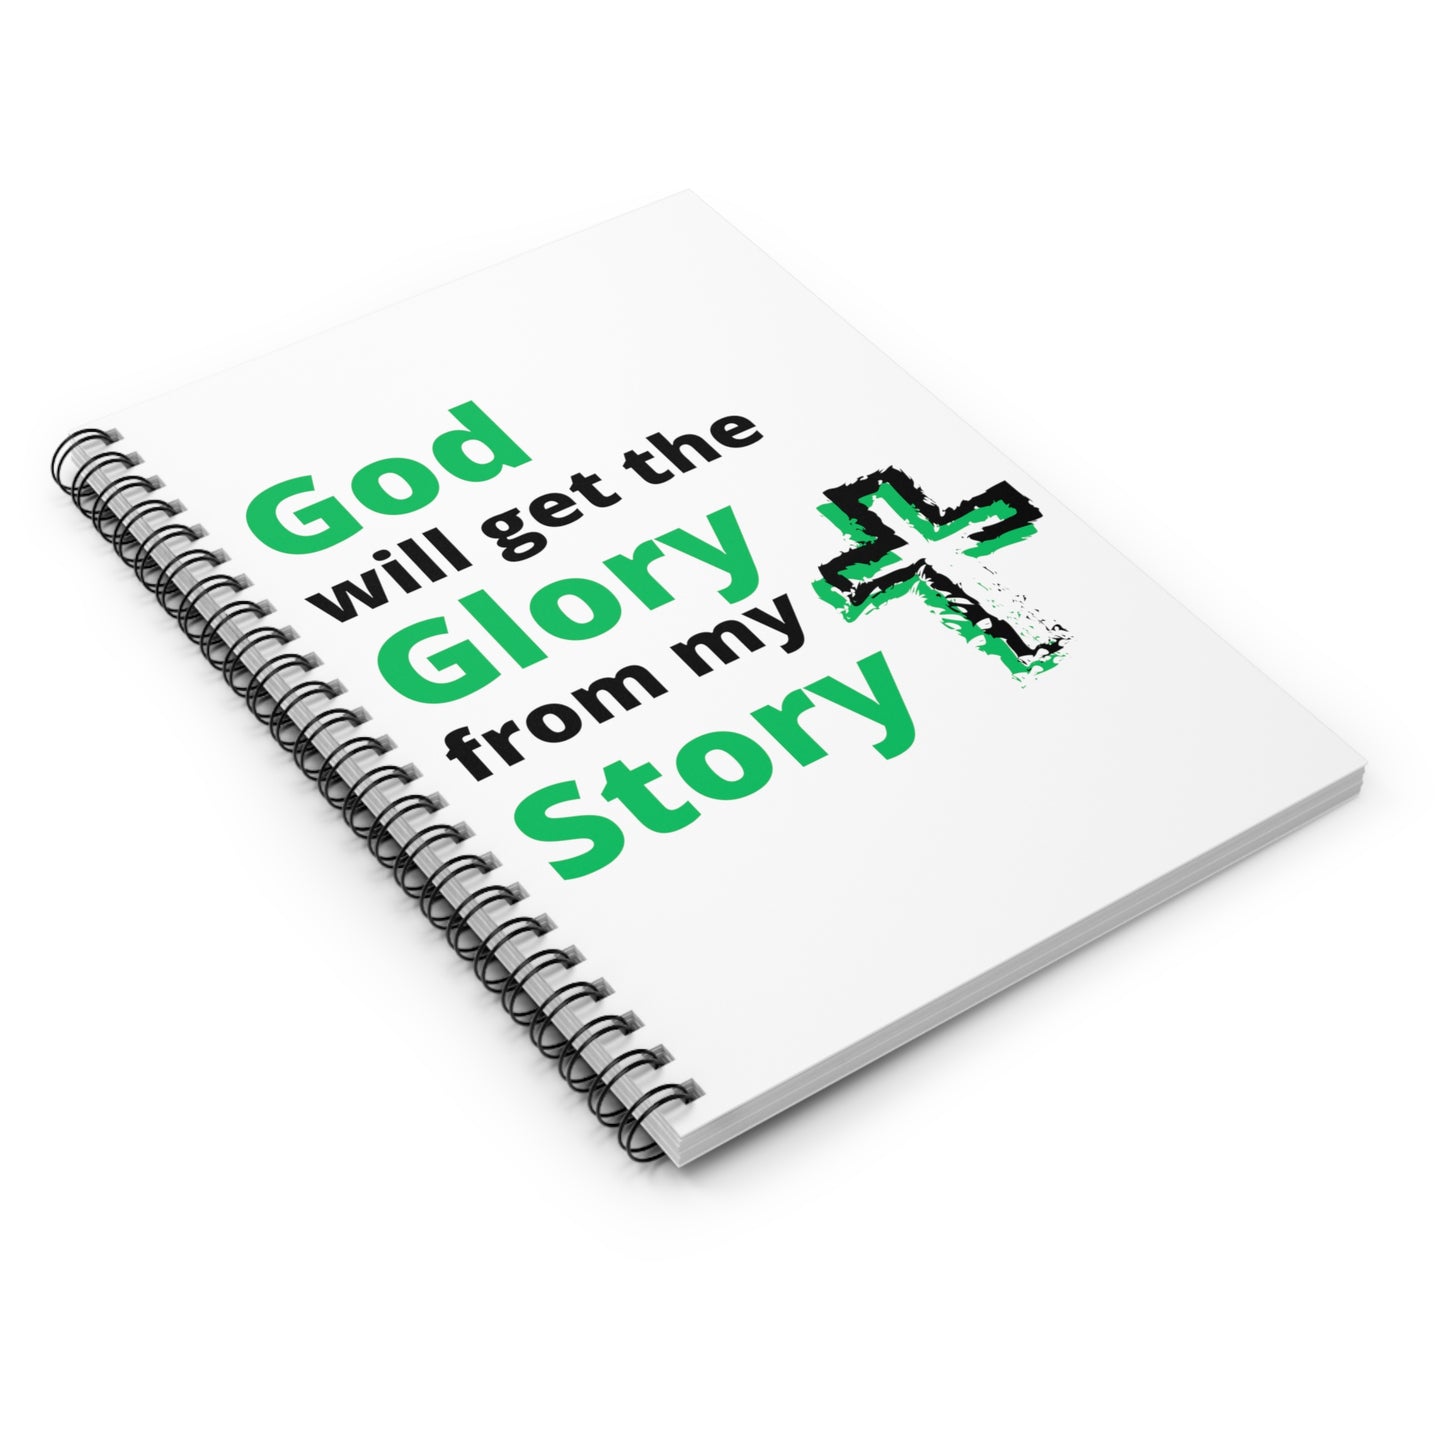 God will get the Glory from my Story (Green Design with a Cross) Spiral Notebook - Ruled Line